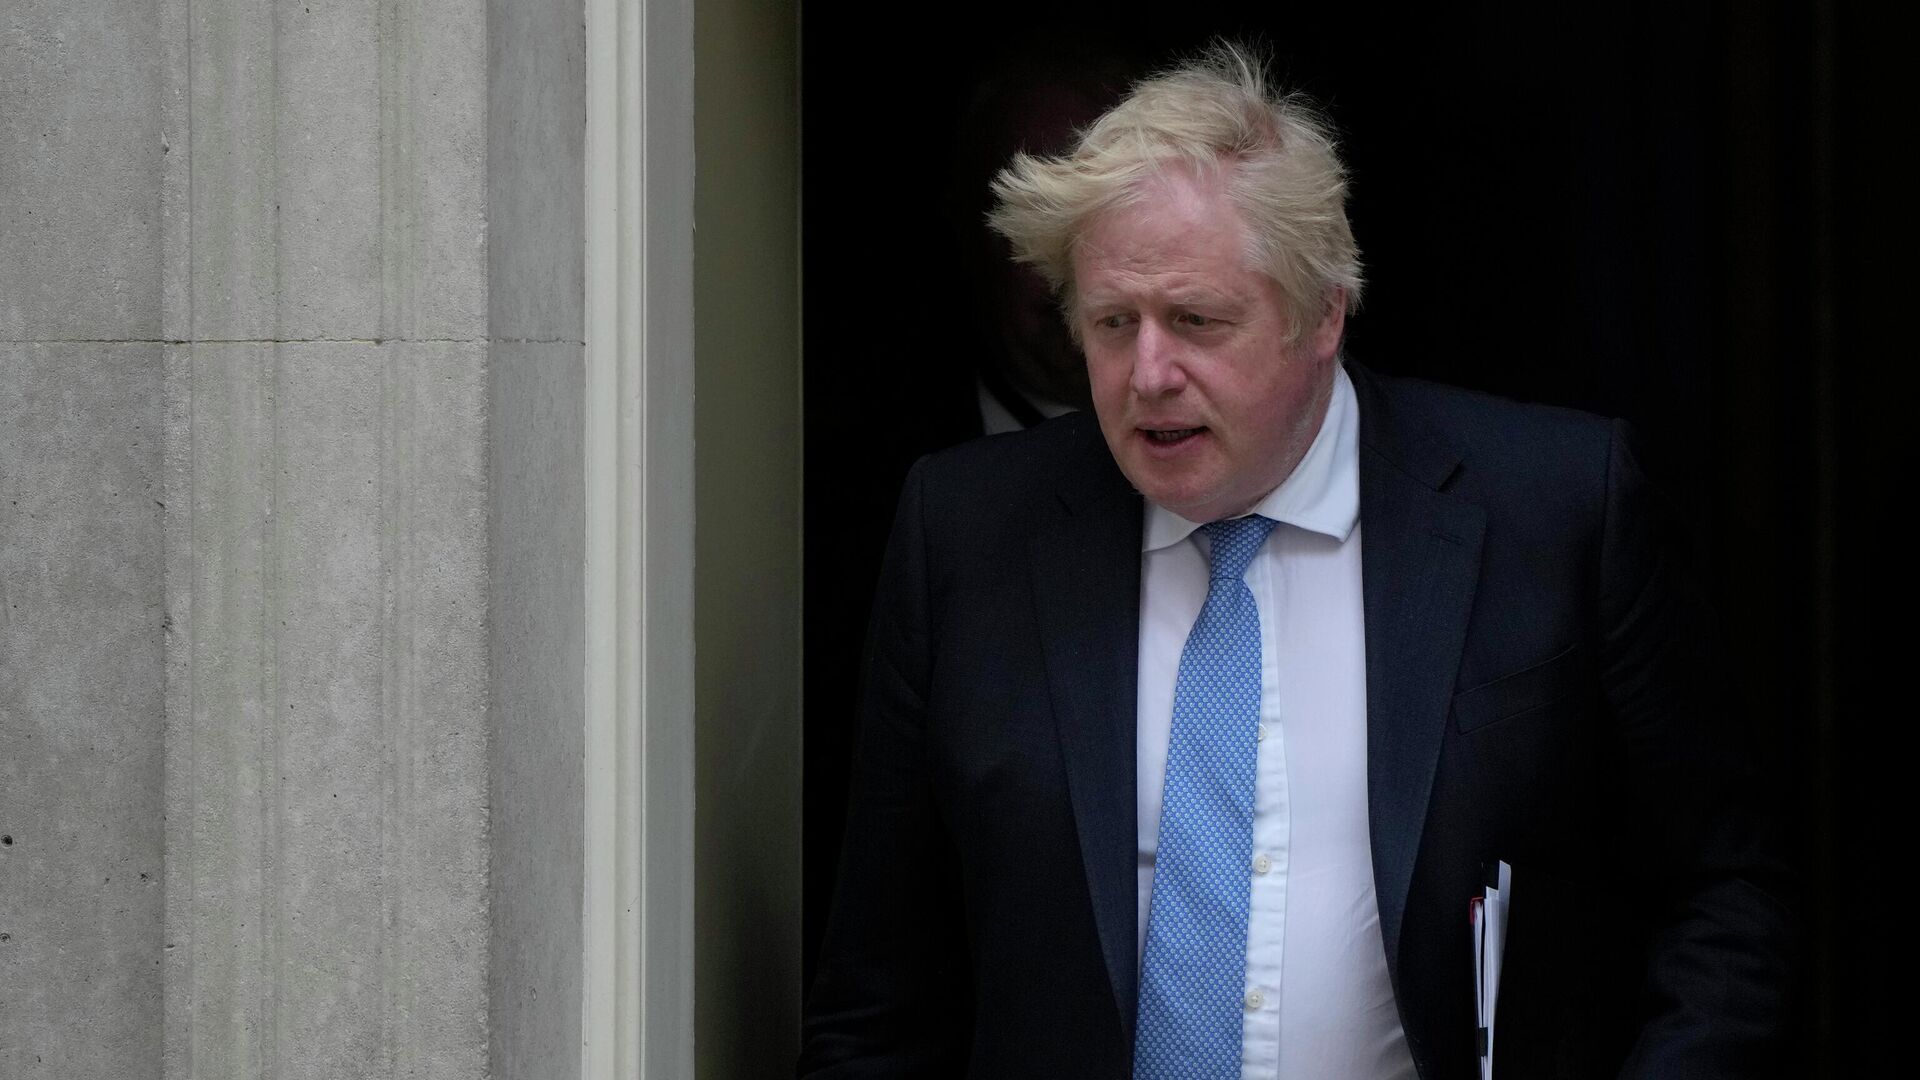 Britain's Prime Minister Boris Johnson leaves 10 Downing Street for the House of Commons to make a statement about Downing Street parties during the coronavirus lockdowns in London, Tuesday, April 19, 2022 - Sputnik International, 1920, 24.04.2022